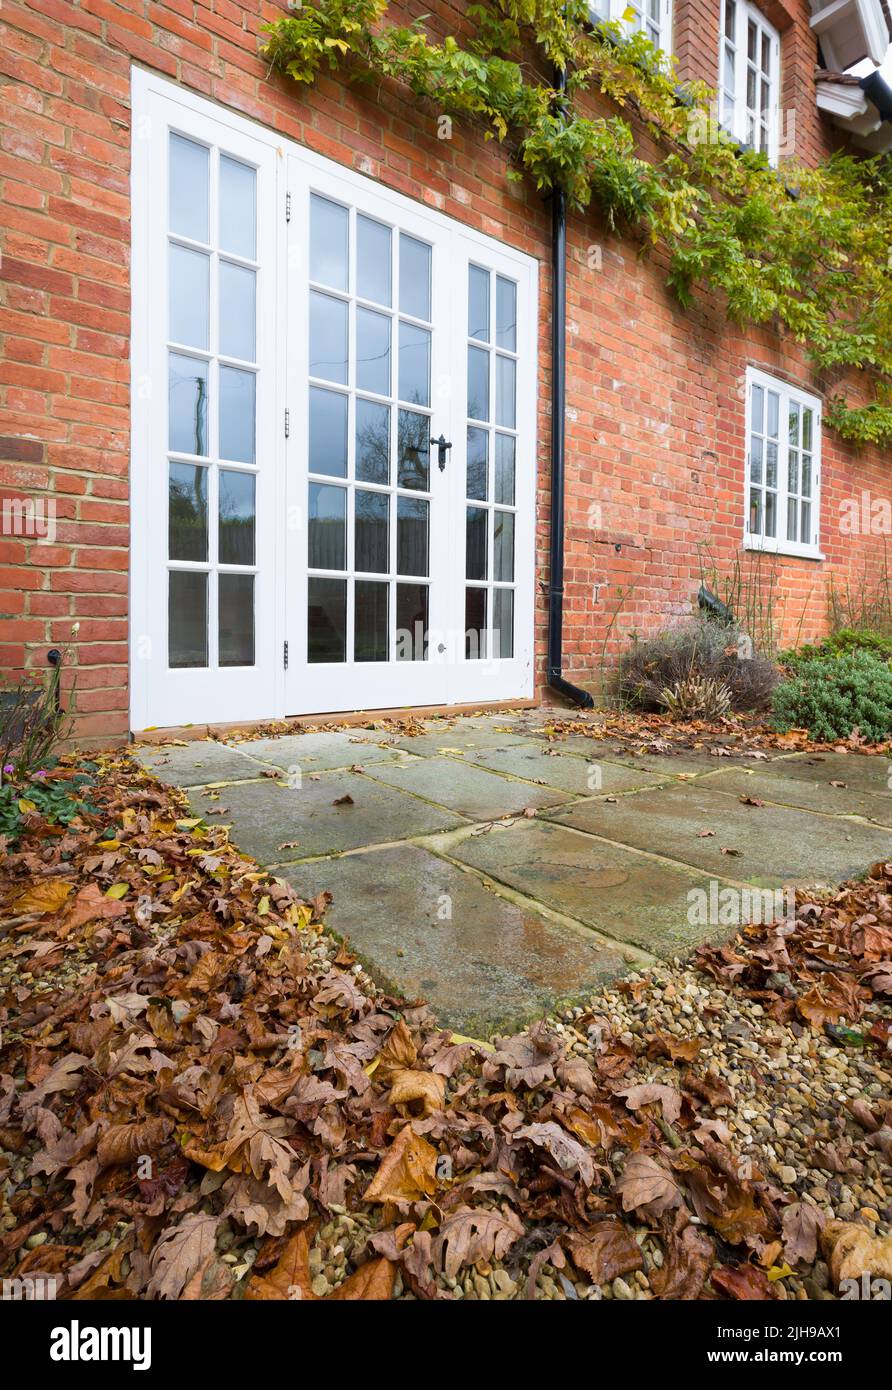 UK landscaped garden in Autumn with leaves, wooden French doors and a York stone patio Stock Photo